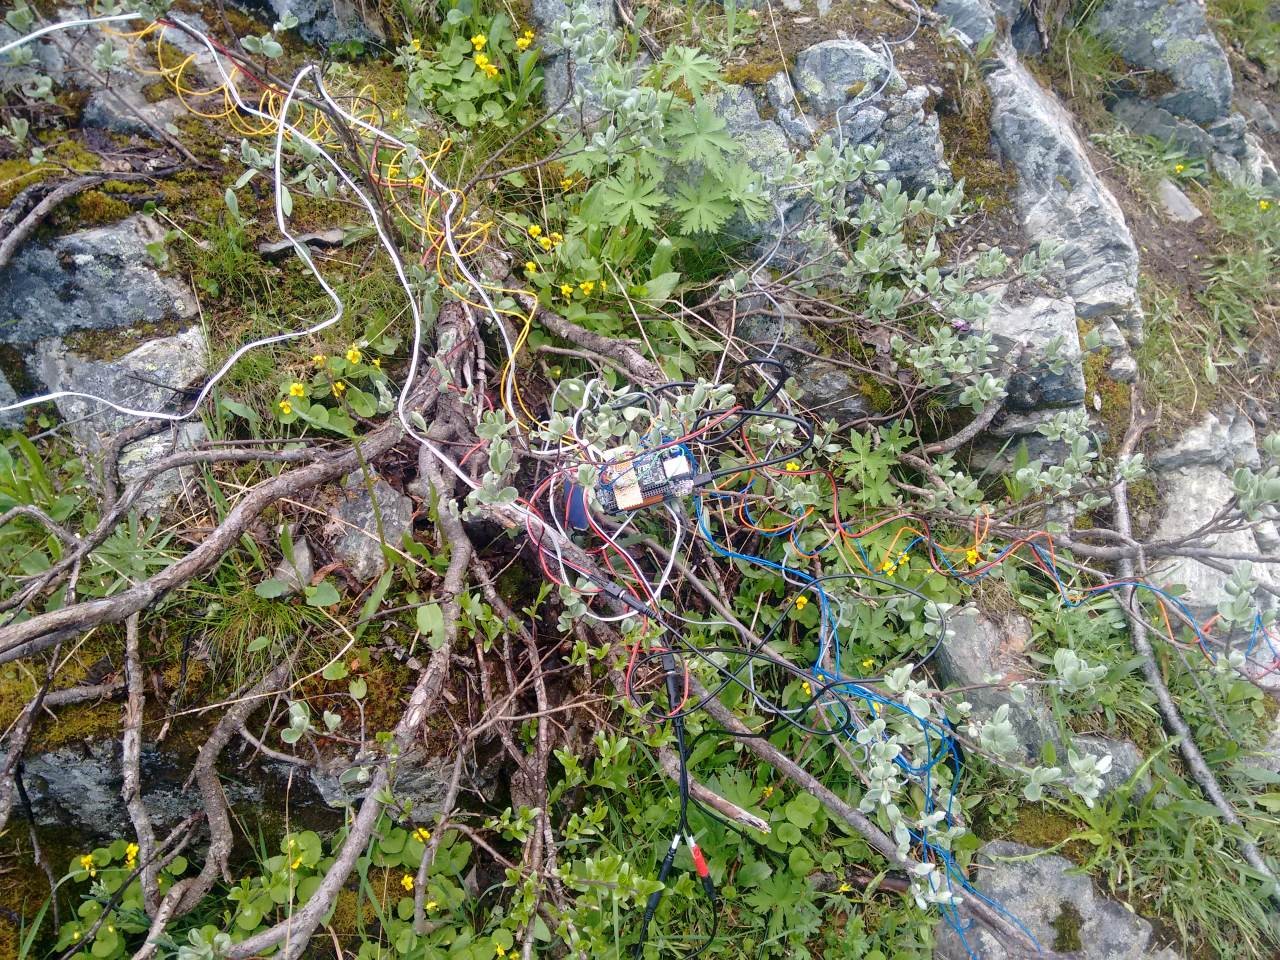 Electronic device with mother board visible and cords protruding in many dirrections is on a pile of fallen branches, rocks covered in moss and dirt.